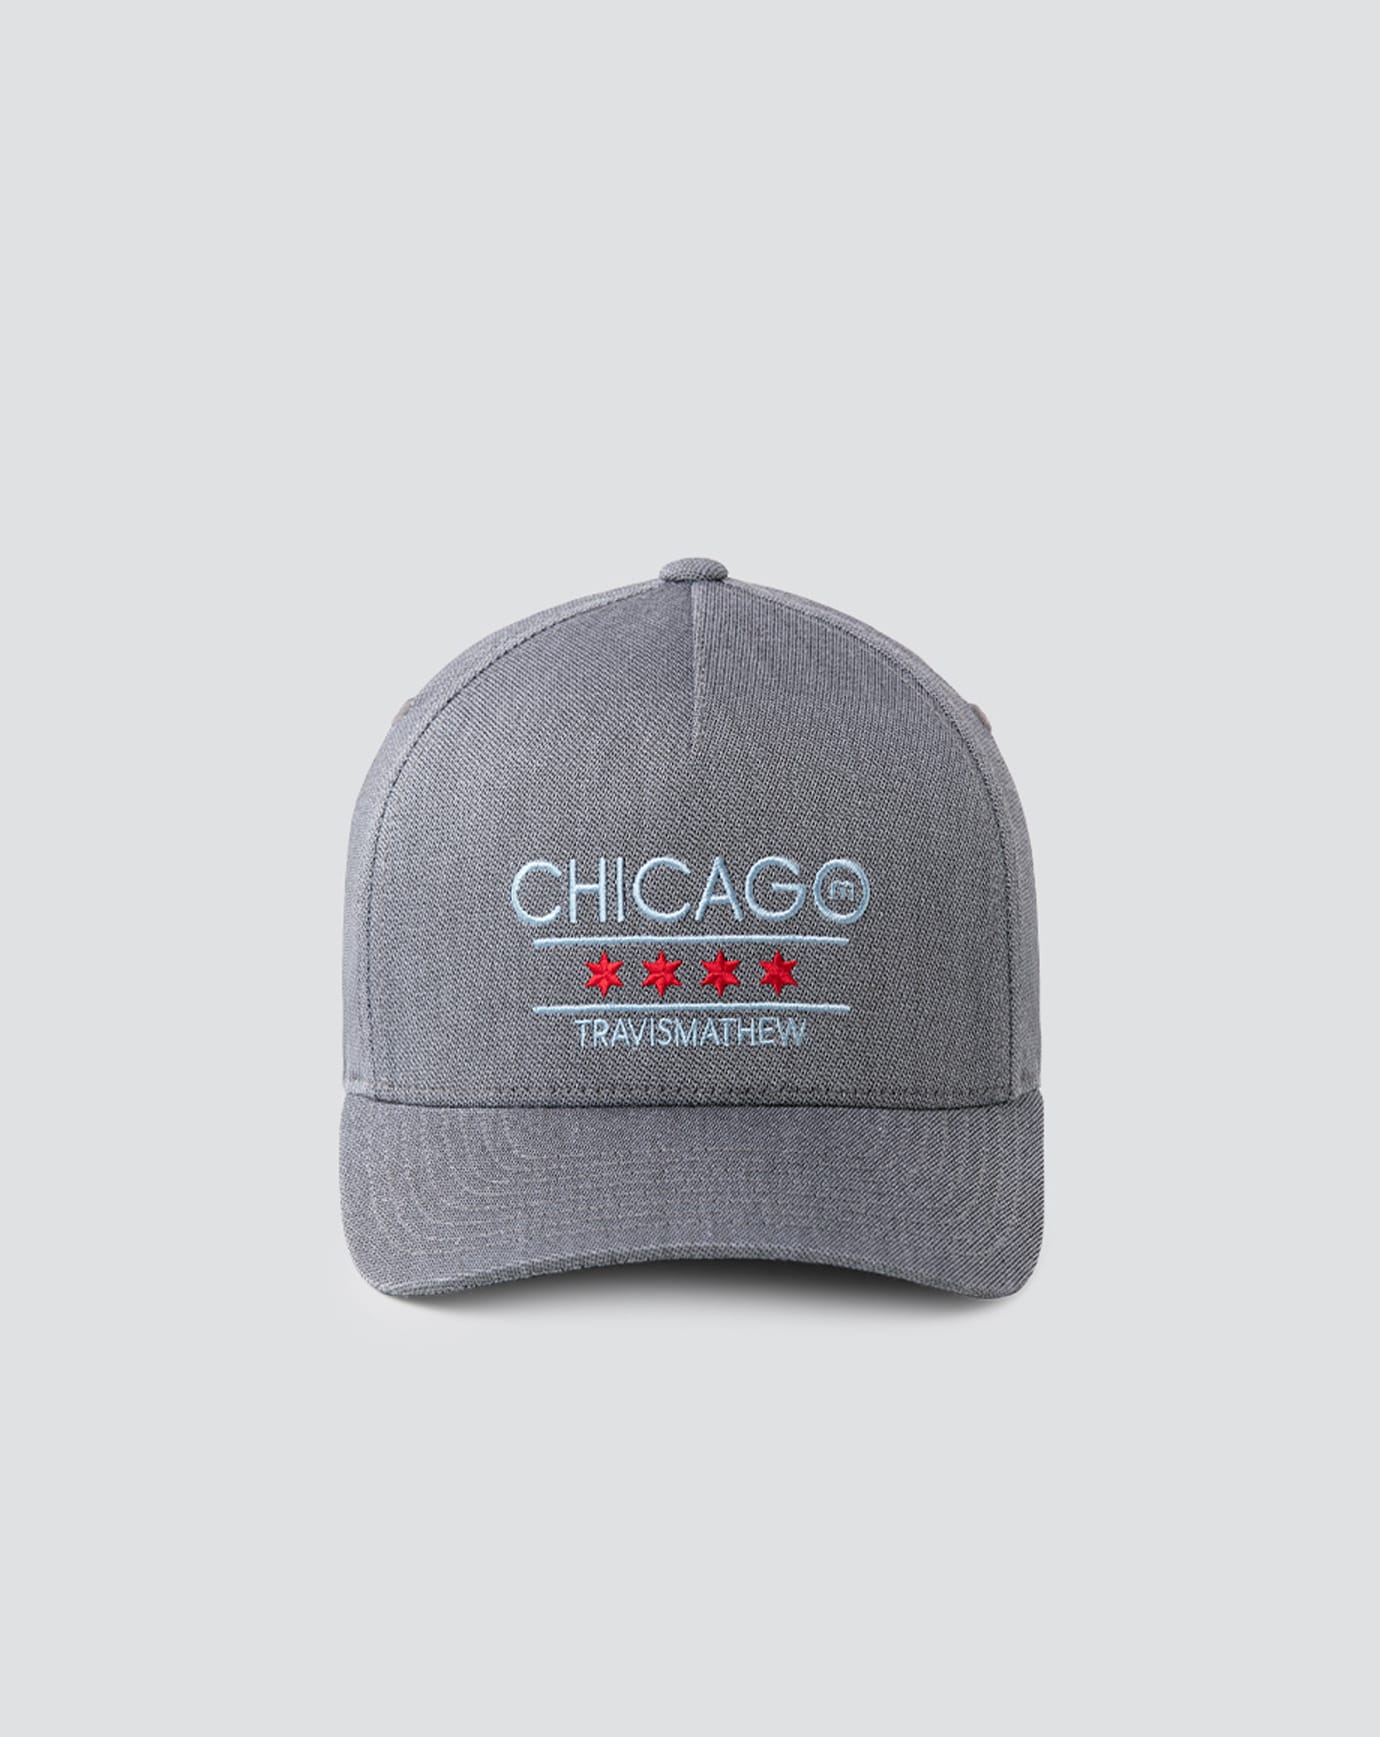 WIND CHILL FITTED HAT Image Thumbnail 1